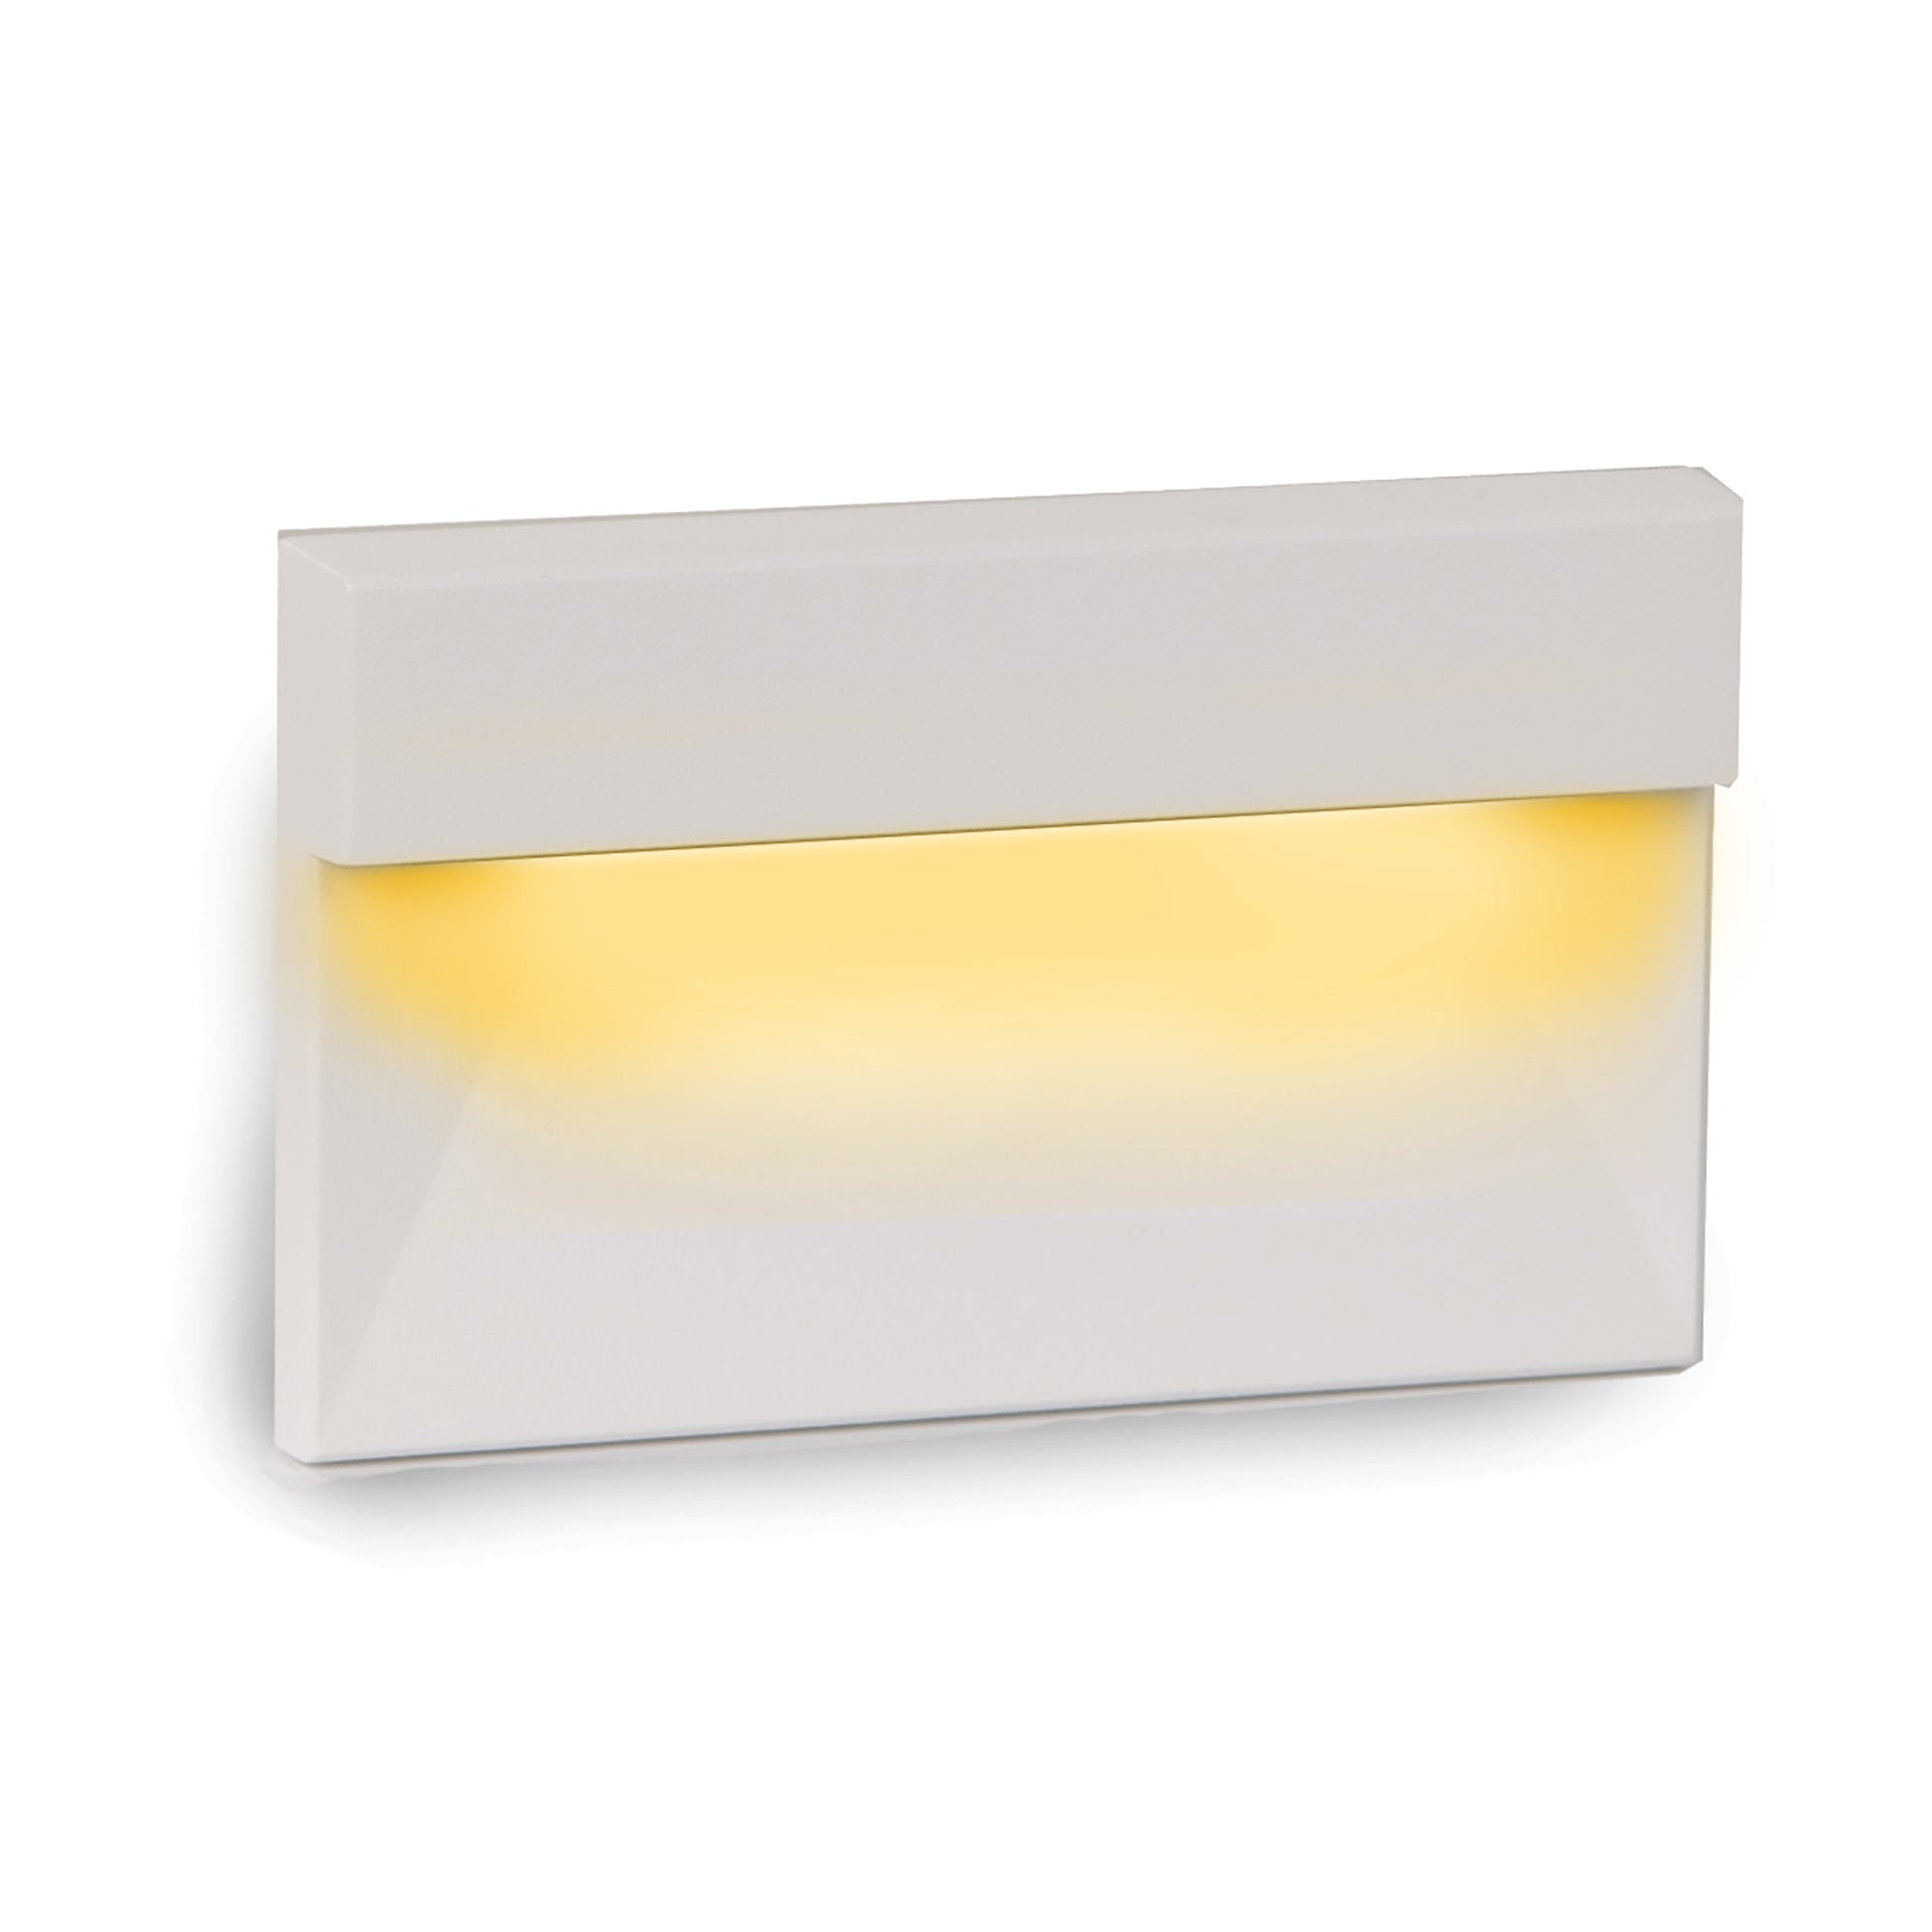 LED 12V Horizontal Ledge Indoor/Outdoor Step and Wall Light